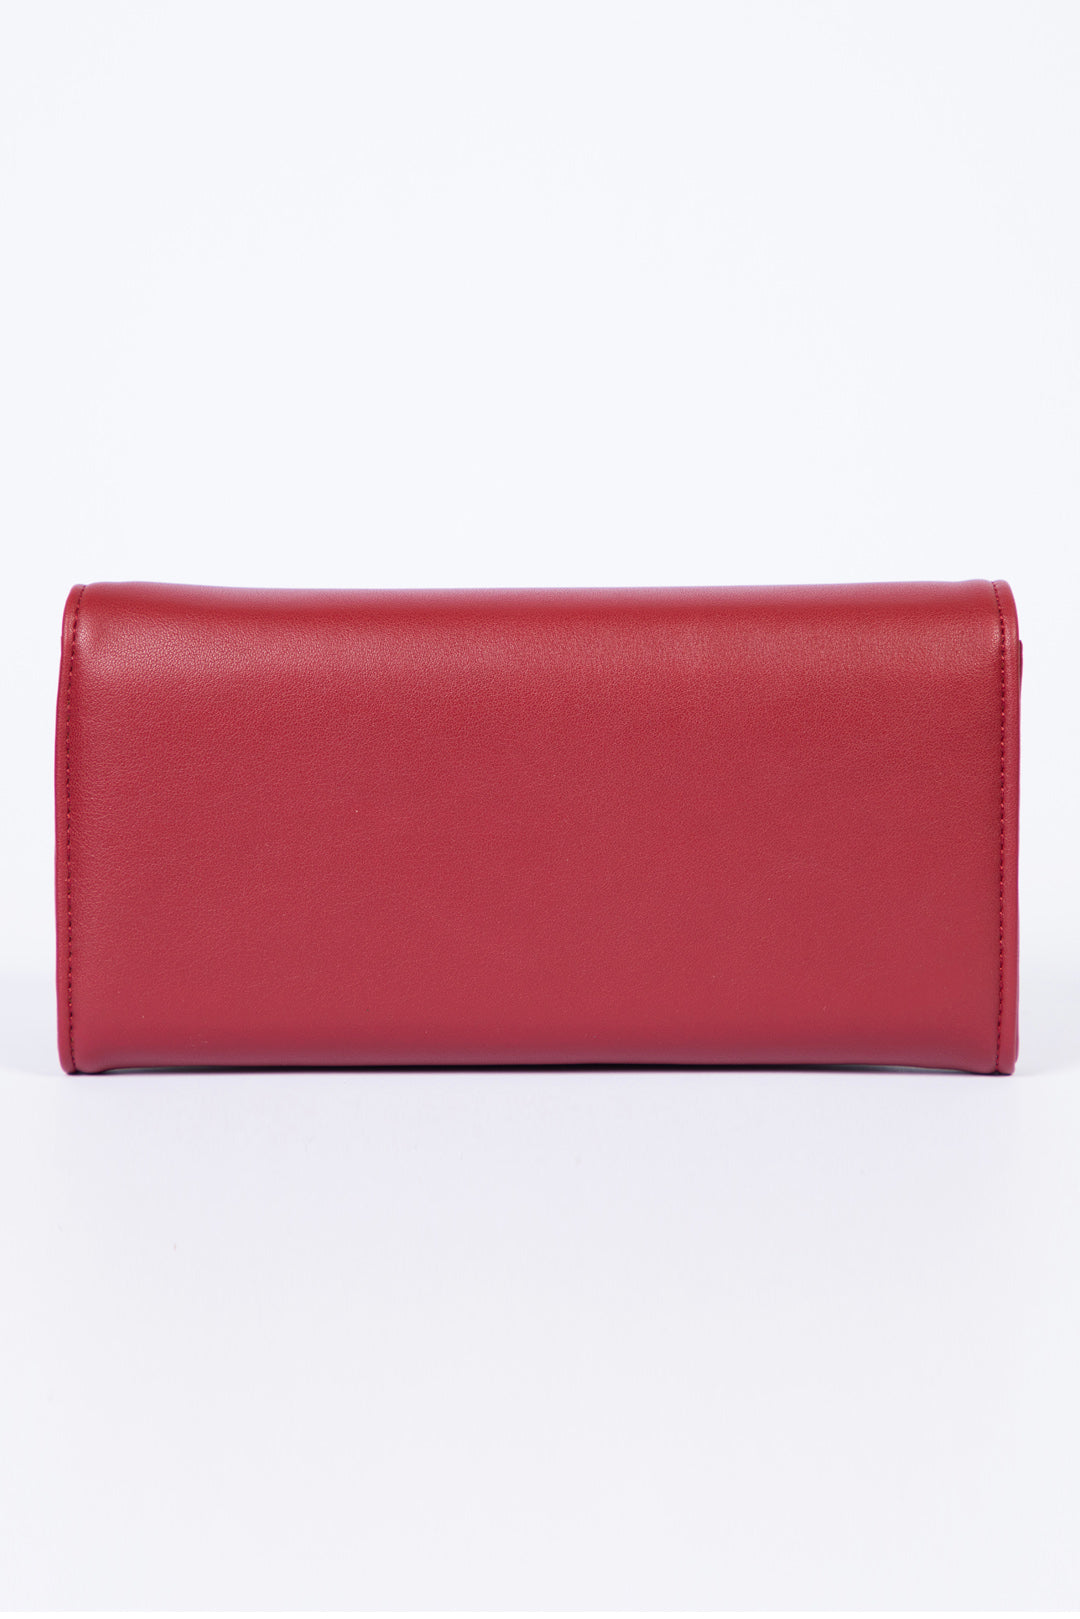 Red Bag - W0457